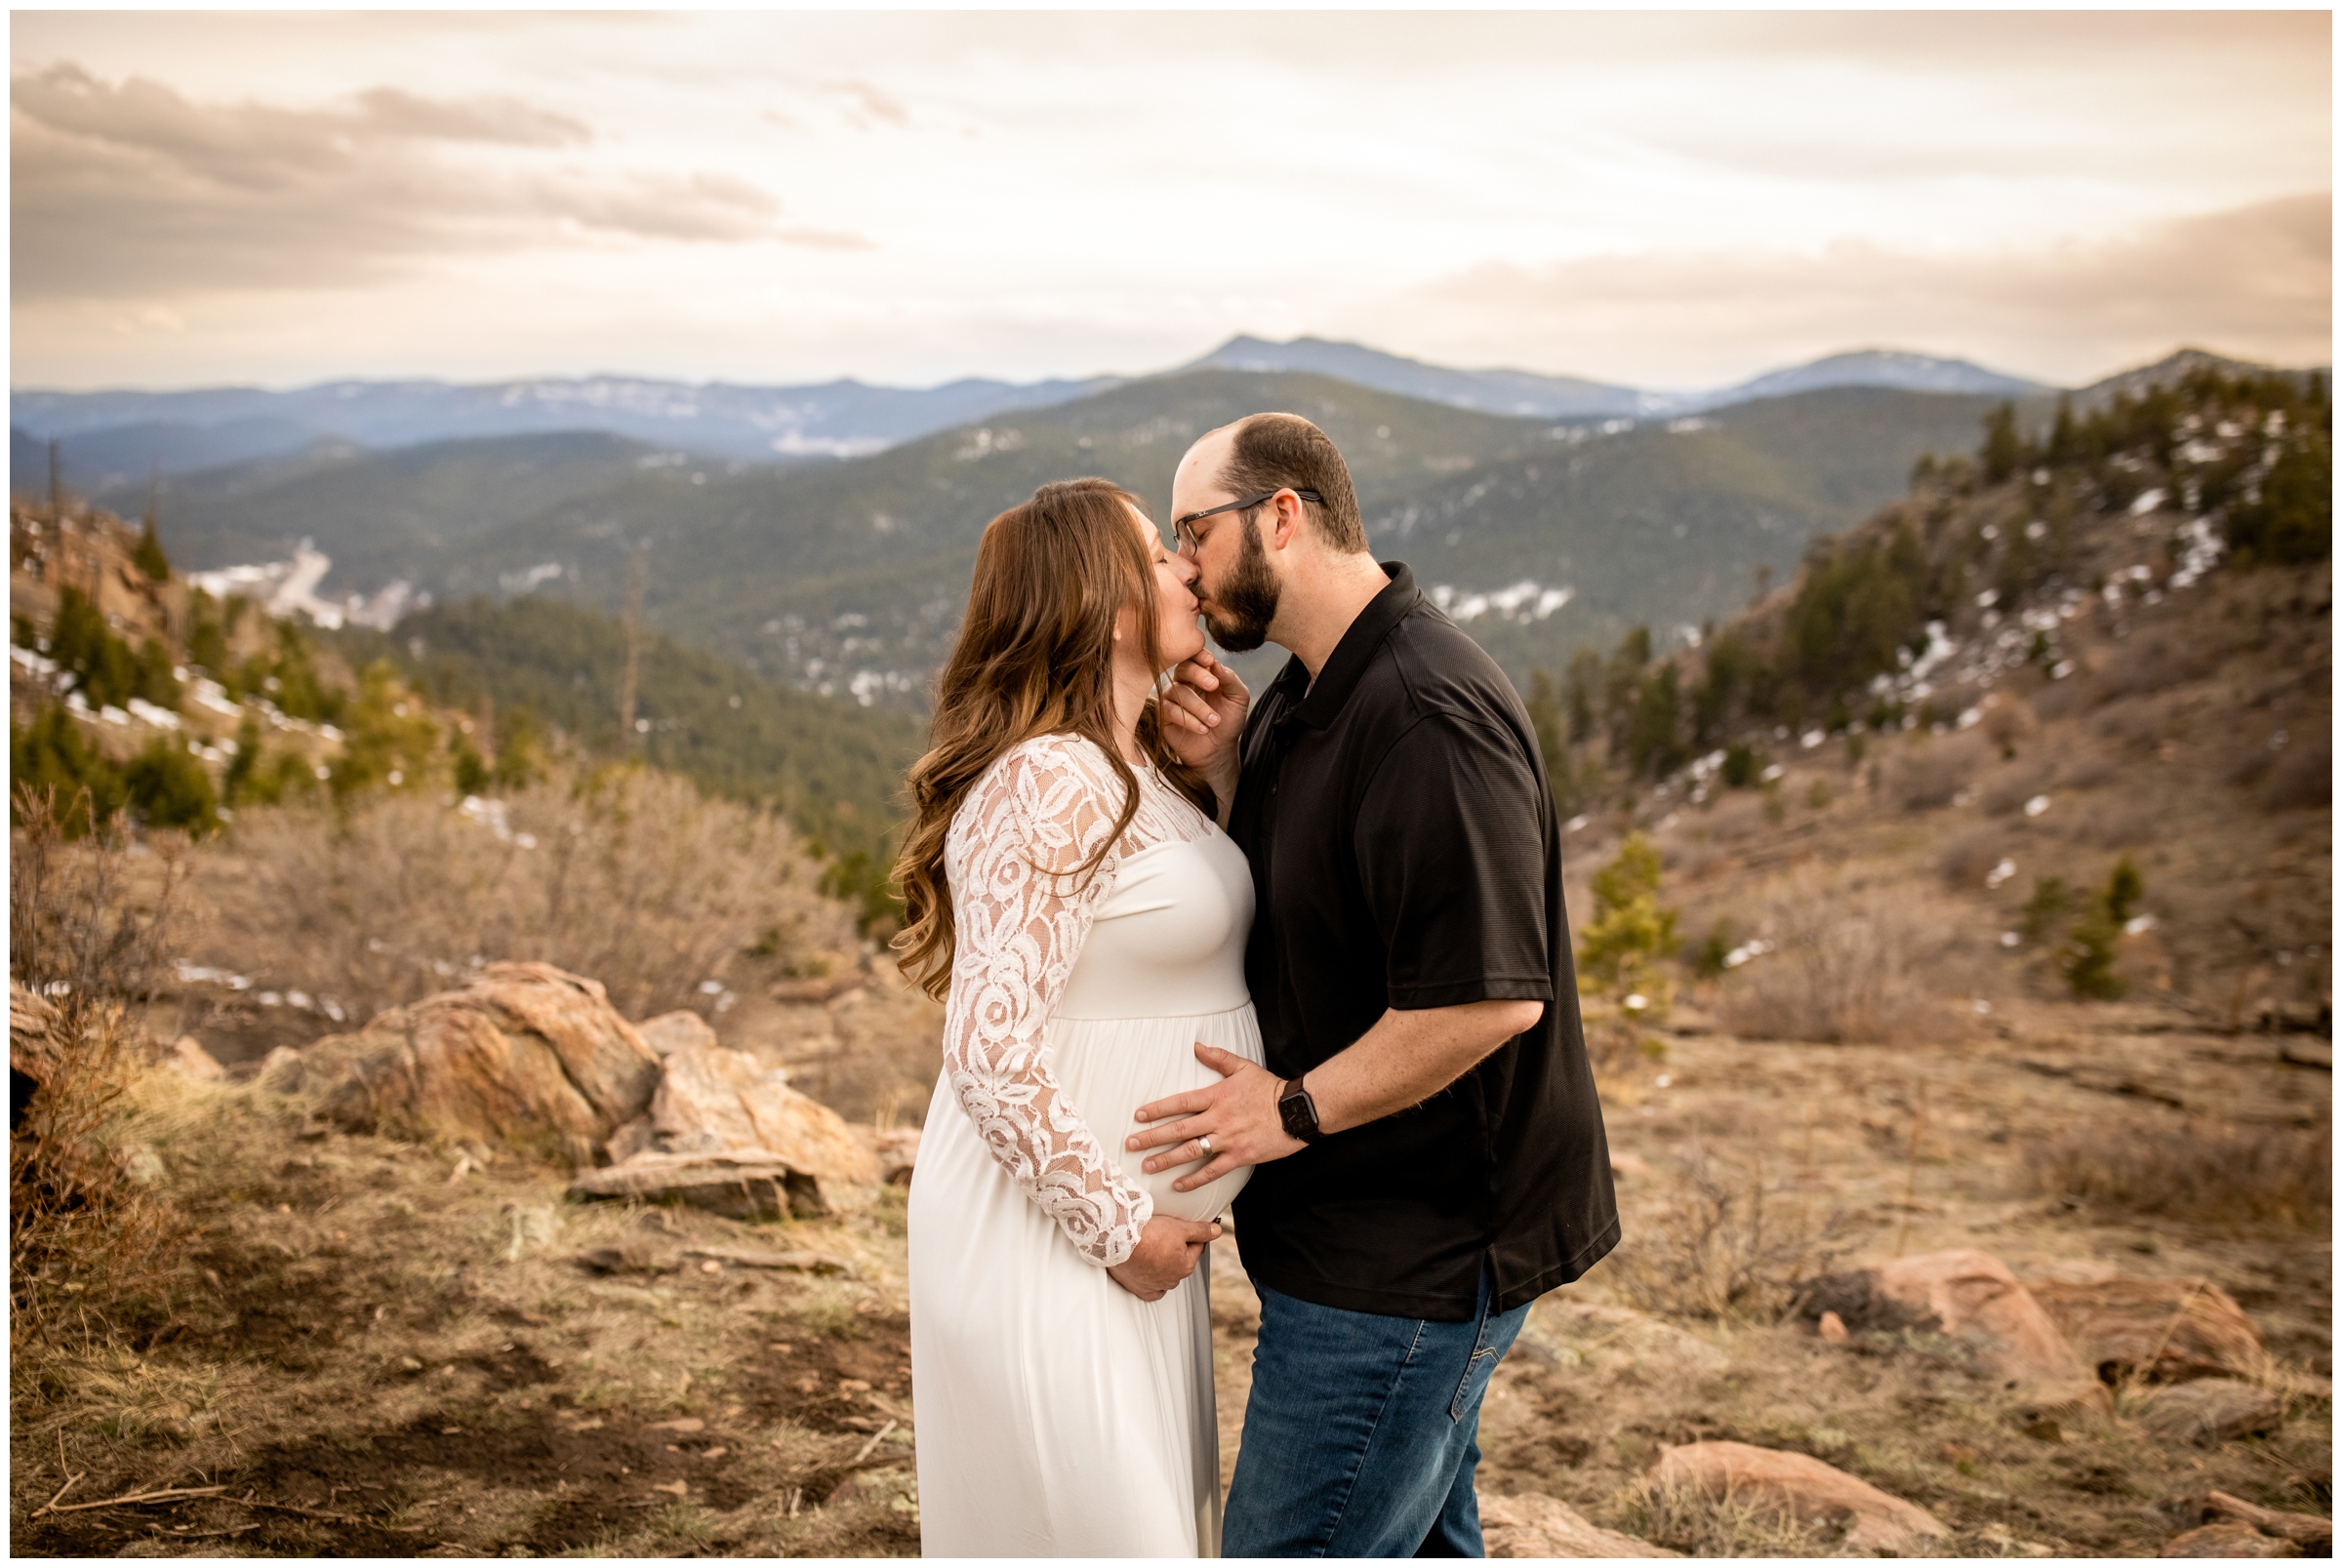 Colorado Mountain Maternity Pictures | Mount Falcon West